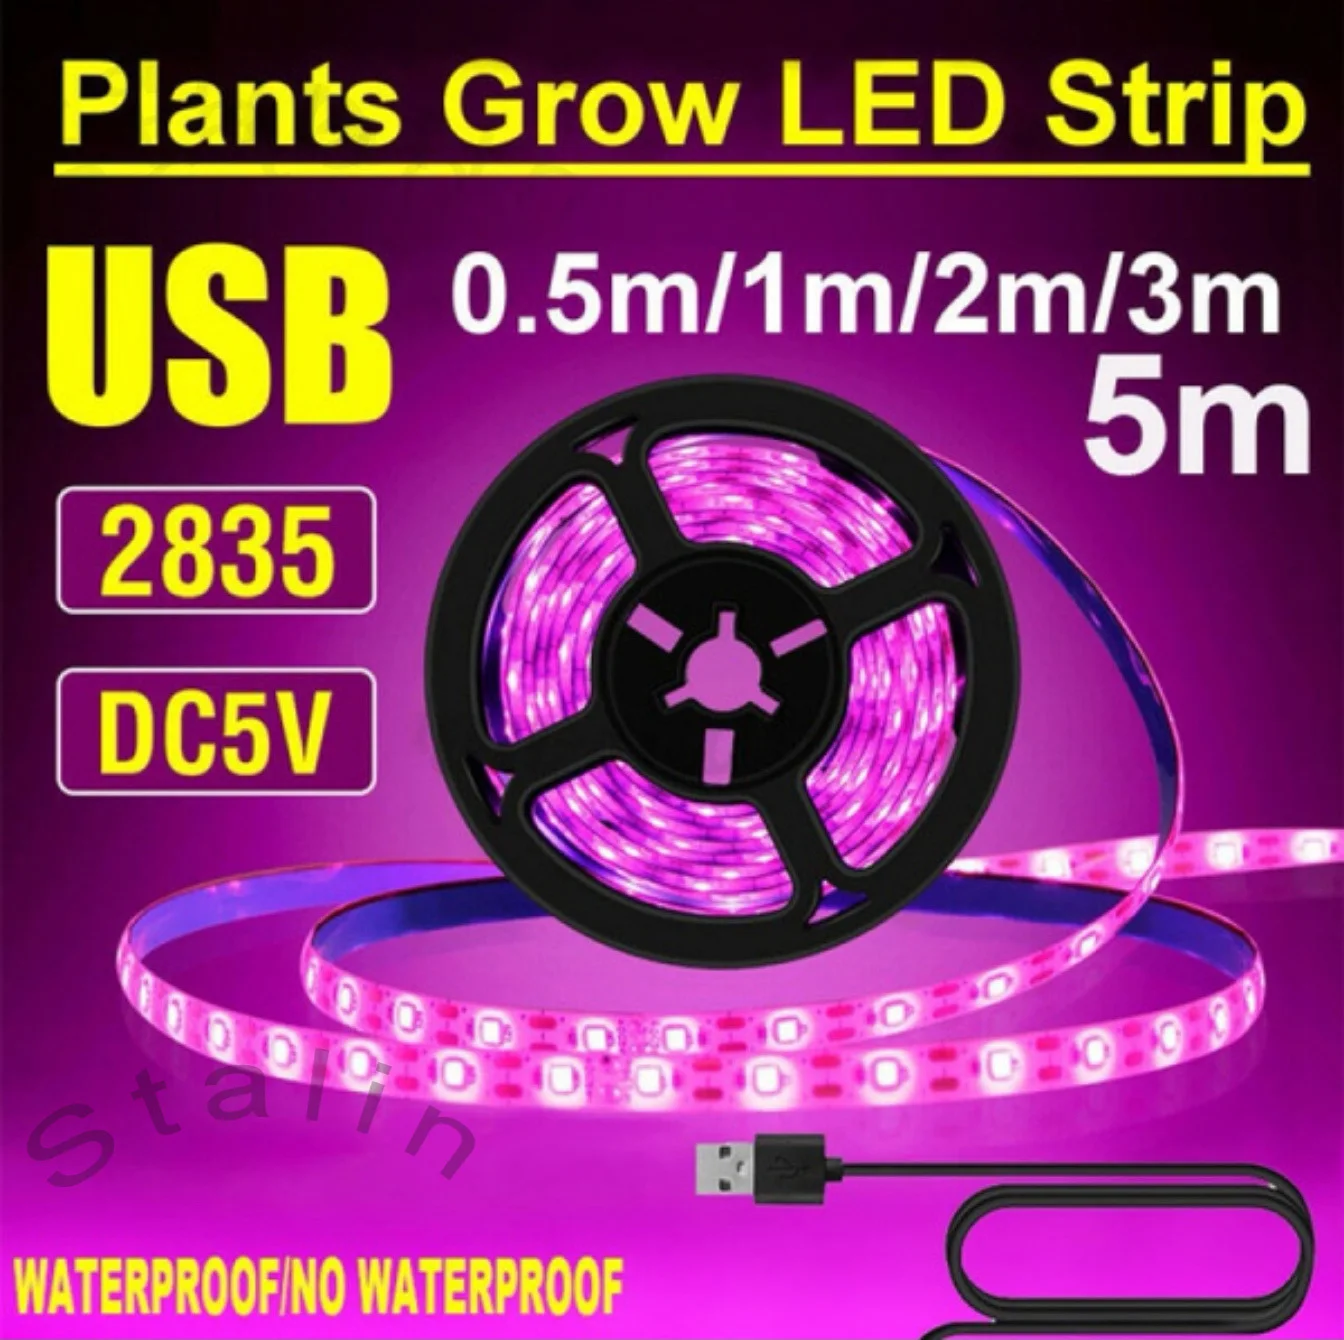 

DC 5V LED Grow Light Full Spectrum USB Grow Light Strip 2835 SMD Phytolamps Plant Growth Light for Greenhouse Hydroponic Growing